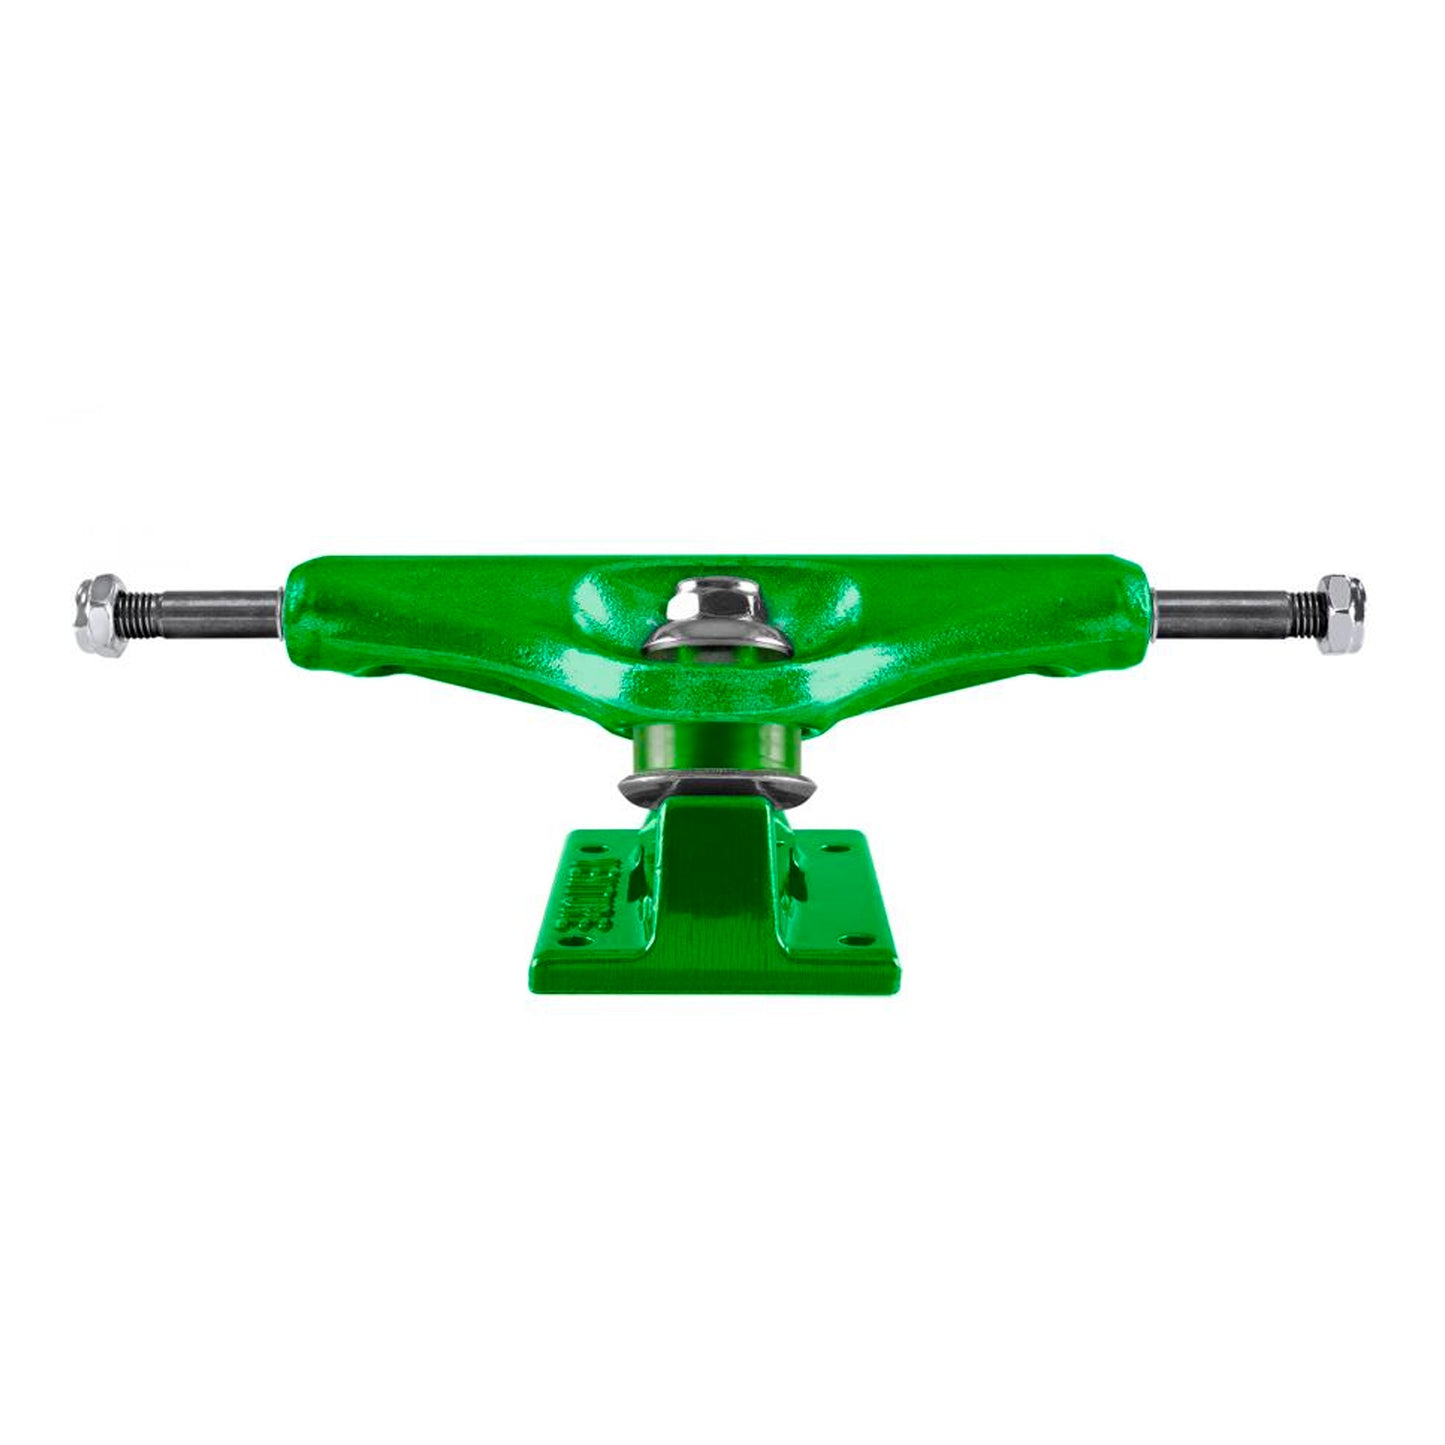 Venture - 5.2 (8") Anodised Team Edition Truck - Green (Sold as a pair) - Prime Delux Store